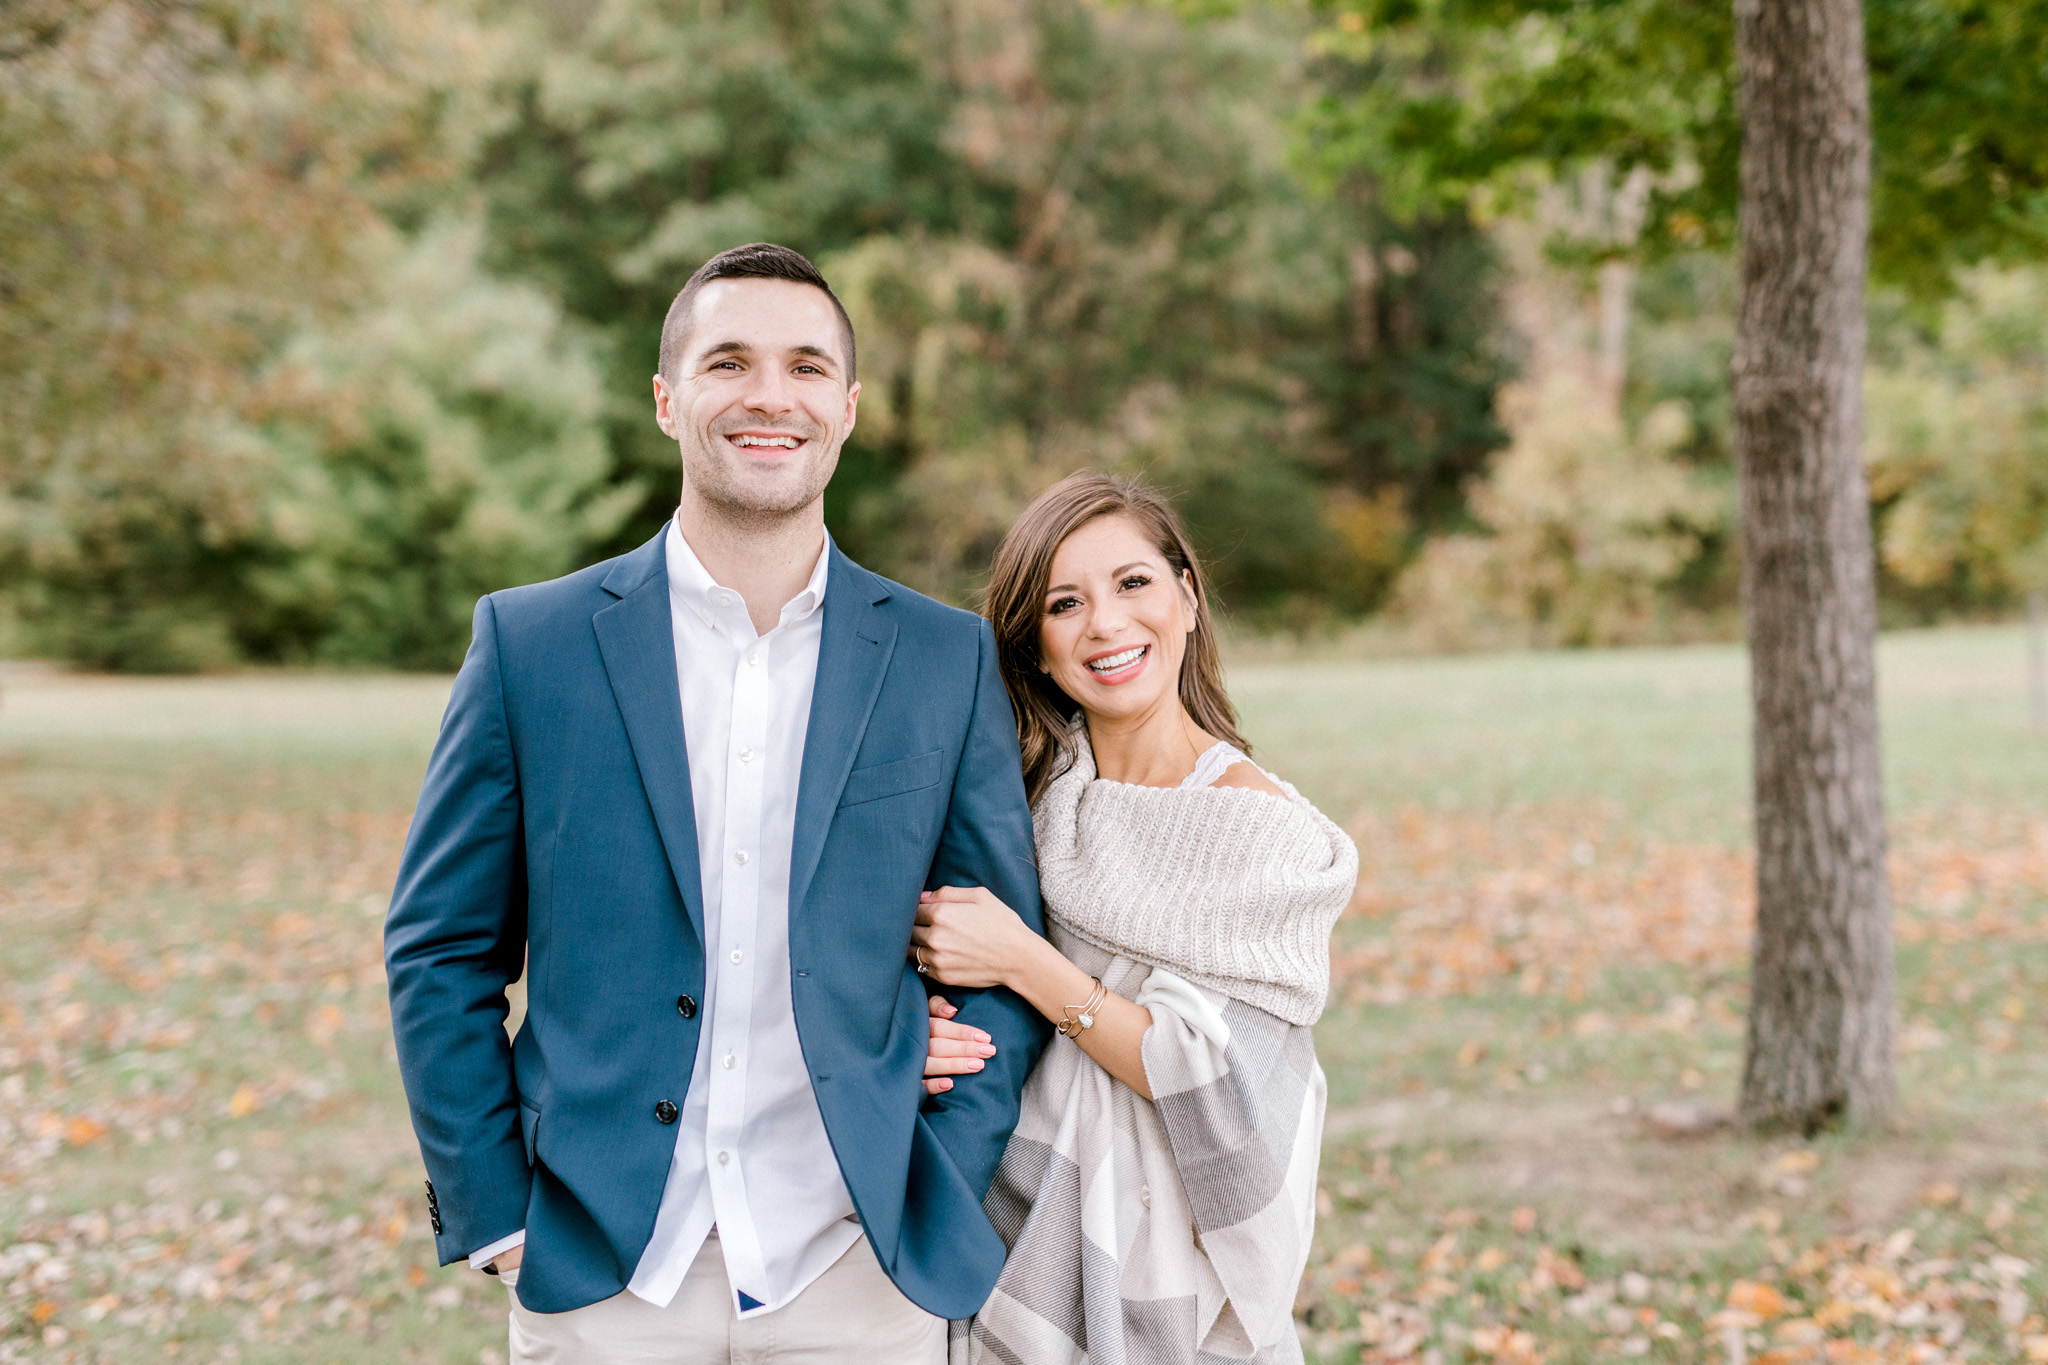 Fall Engagement Session at Lake Michigan and in the Park | Michigan Wedding Photographer | What to Wear to your Engagement Session